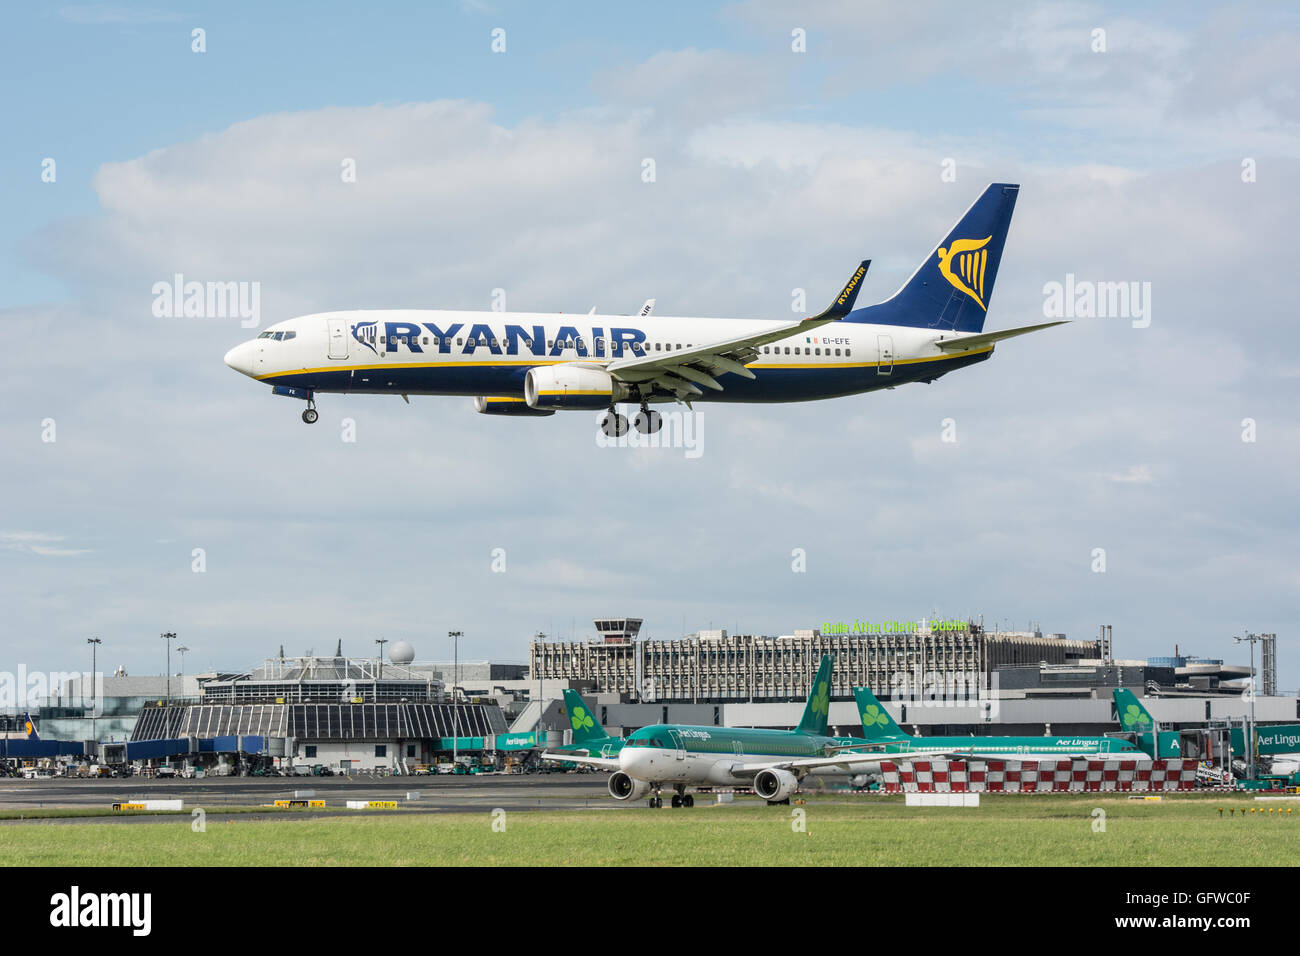 Ryanair plane landing with Dublin airport sign visible on the terminal below and with lots of aer lingus planes on the ground. Stock Photo